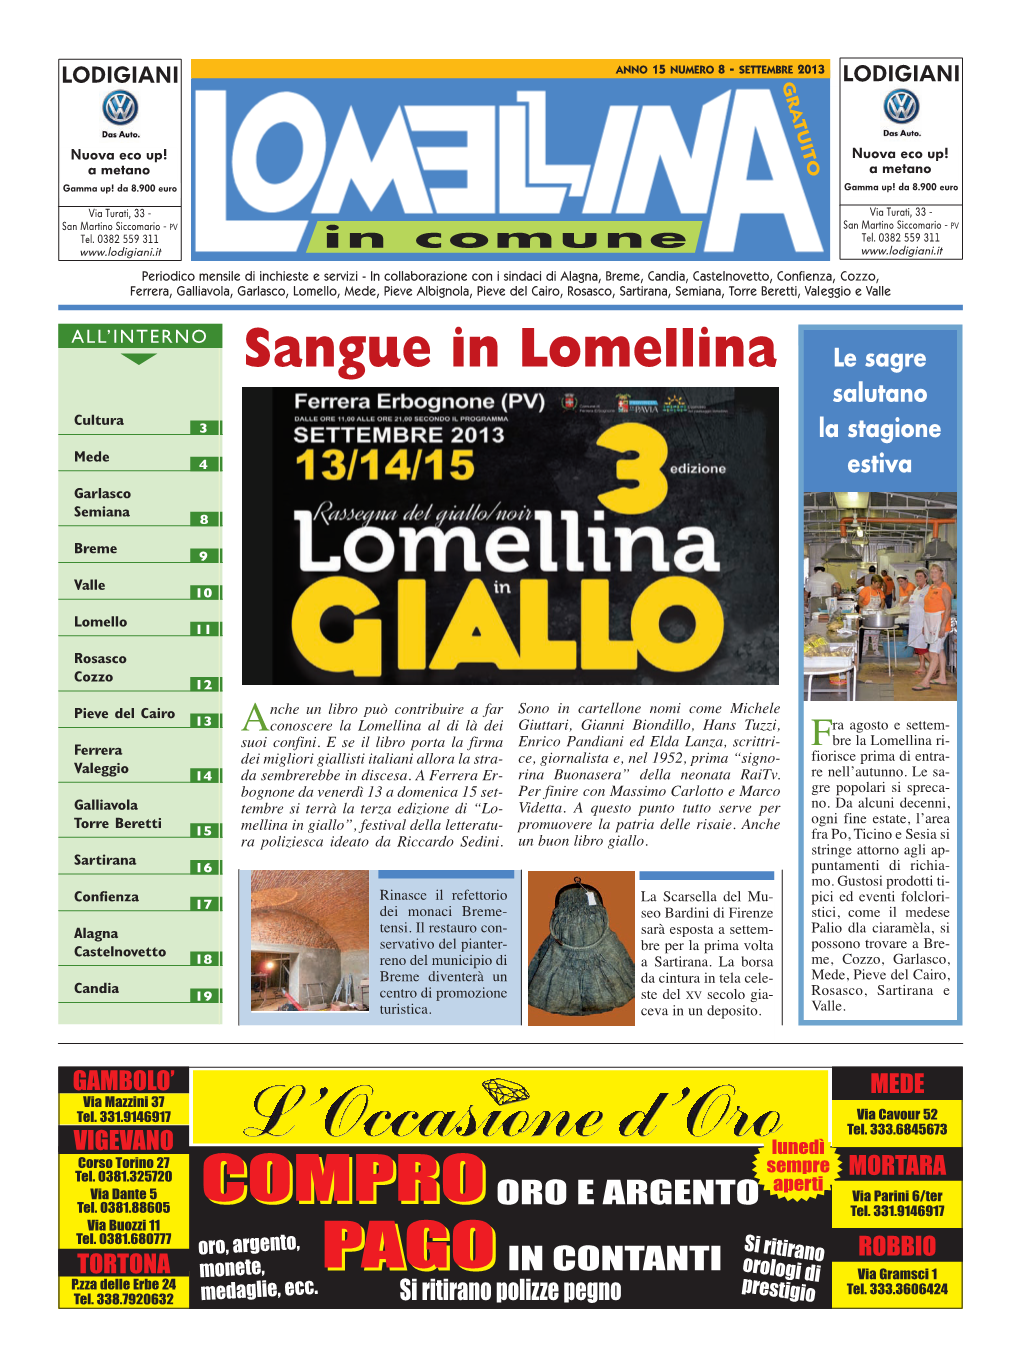 Sangue in Lomellina